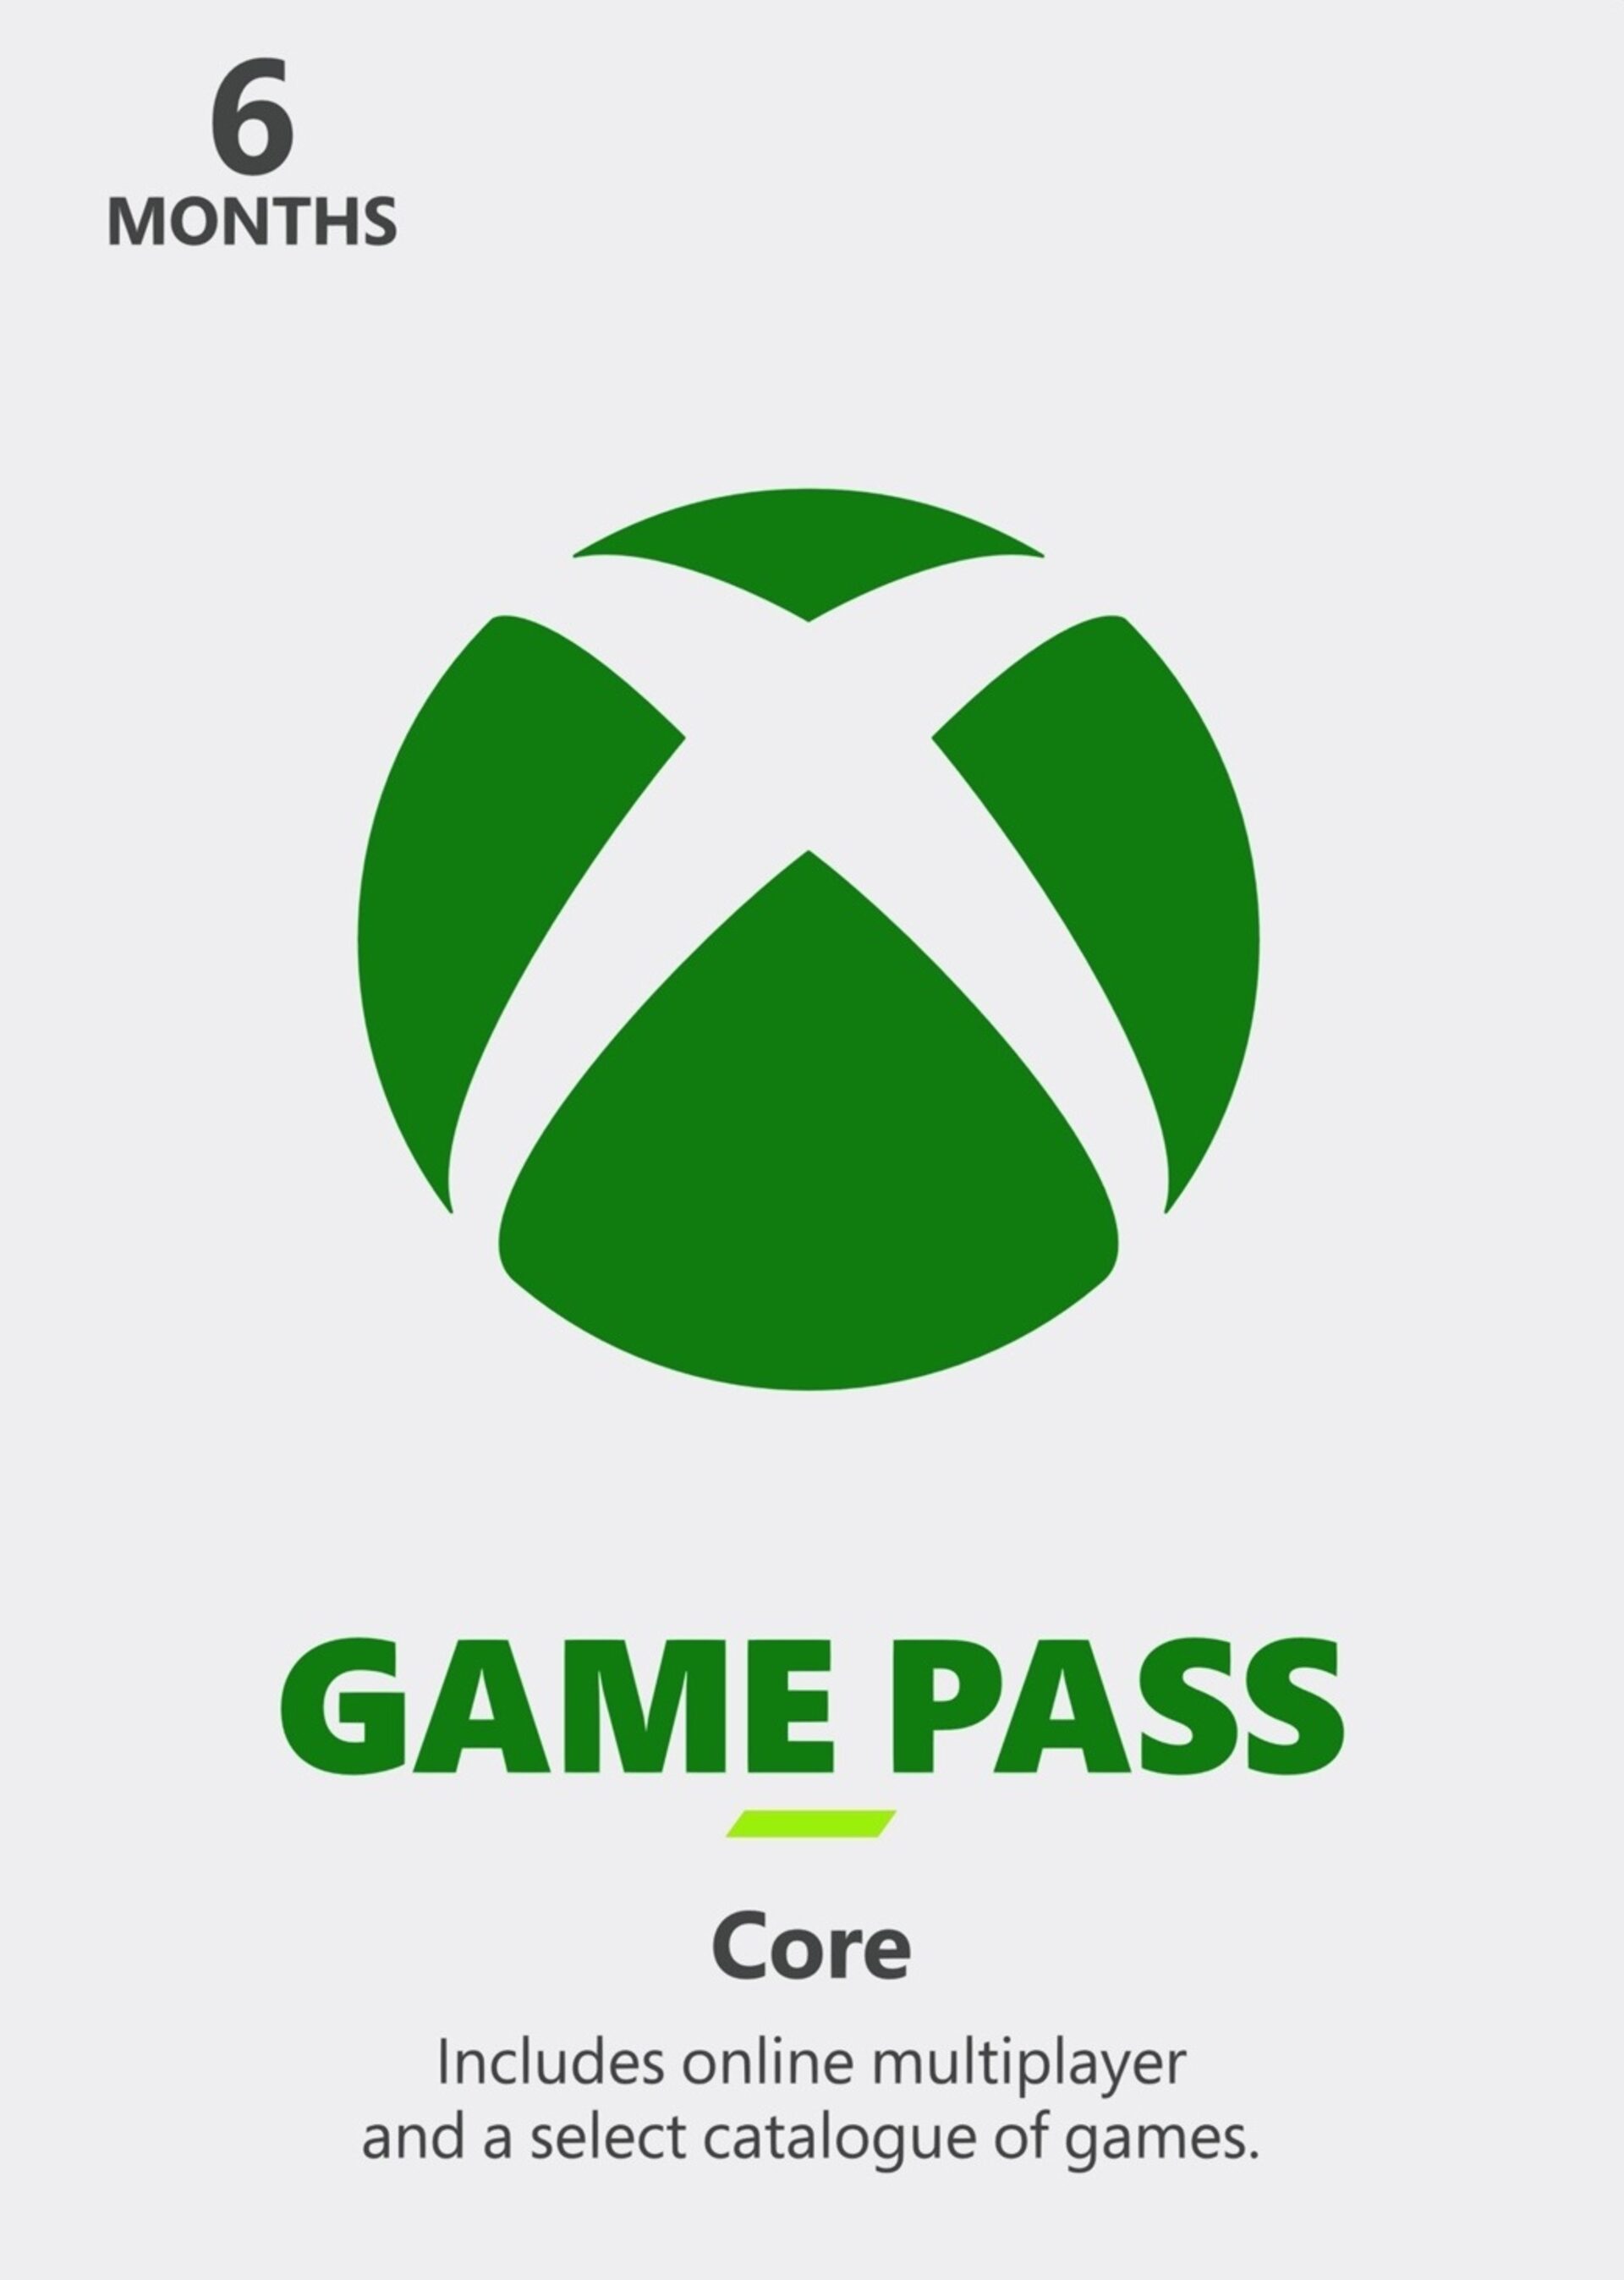 Madden NFL 22 Weekly Xbox Game Pass Quest Guide - Play 4 Online Games 